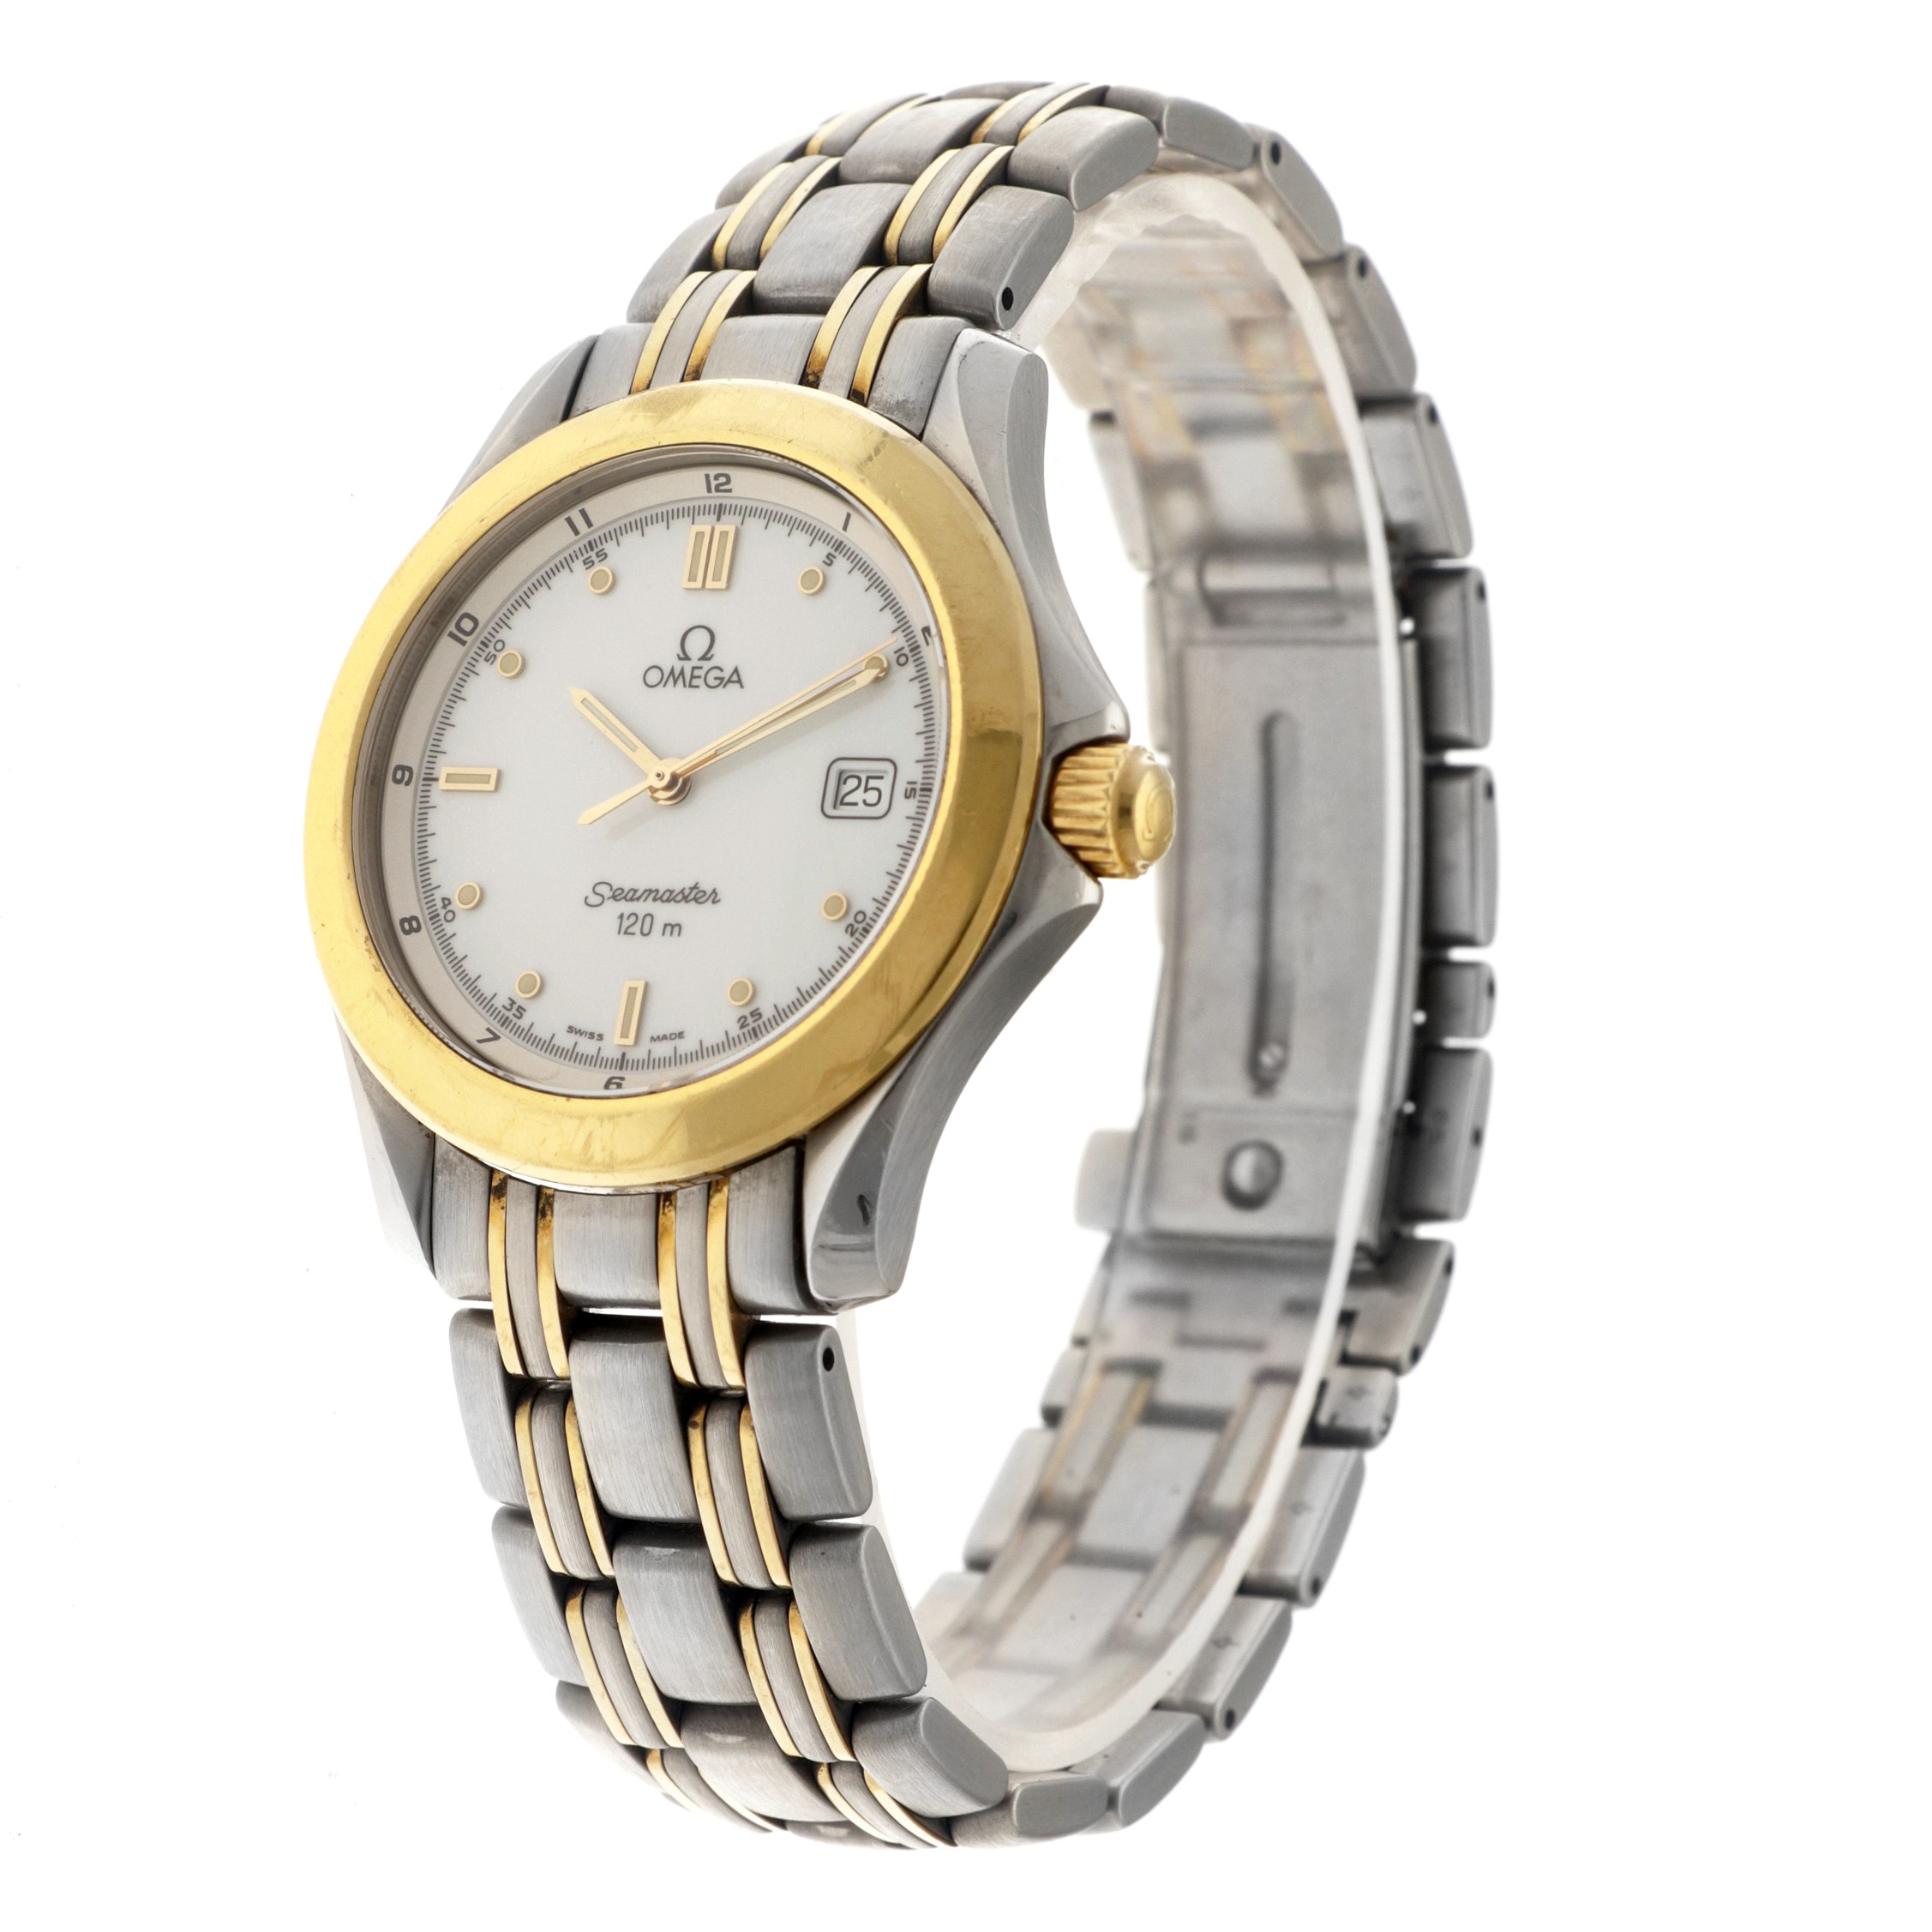 No Reserve - Omega Seamaster 120 54528687 - Men's watch - approx. 1993. - Image 2 of 6